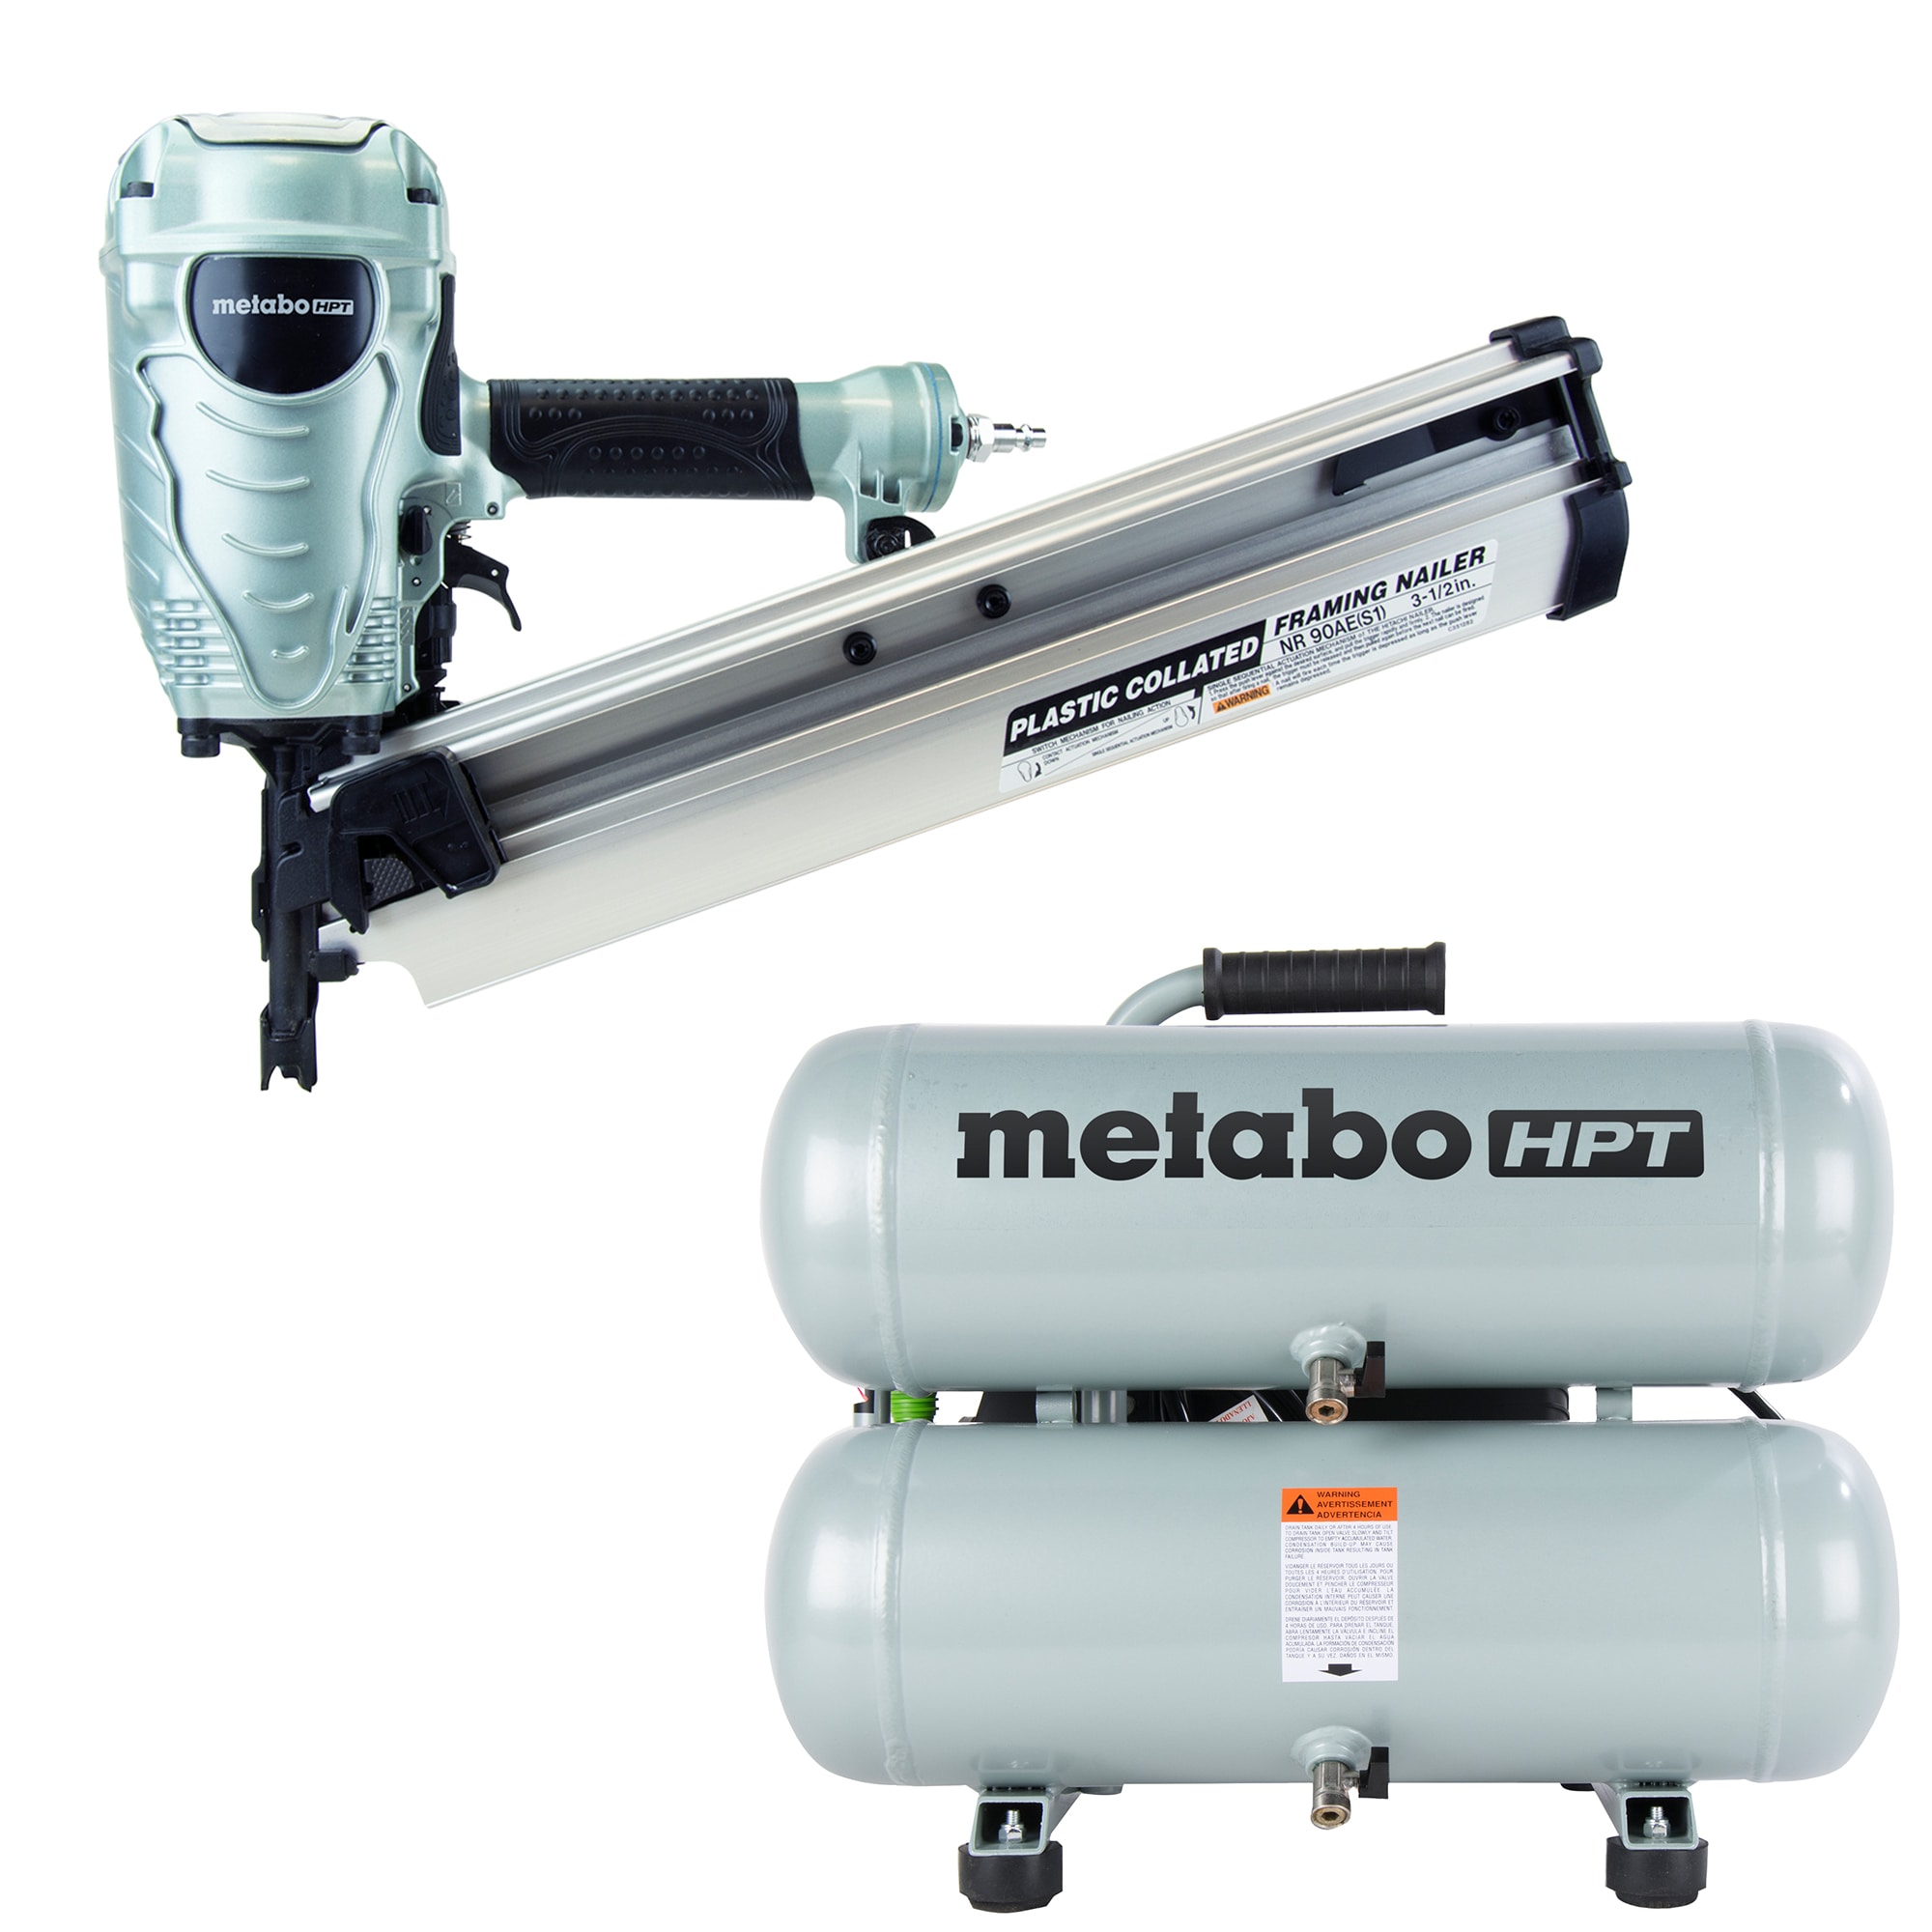 Metabo HPT 21-Degree Pneumatic Framing Nailer with 4-Gallon Single Stage Portable Electric Twin Stack Air Compressor